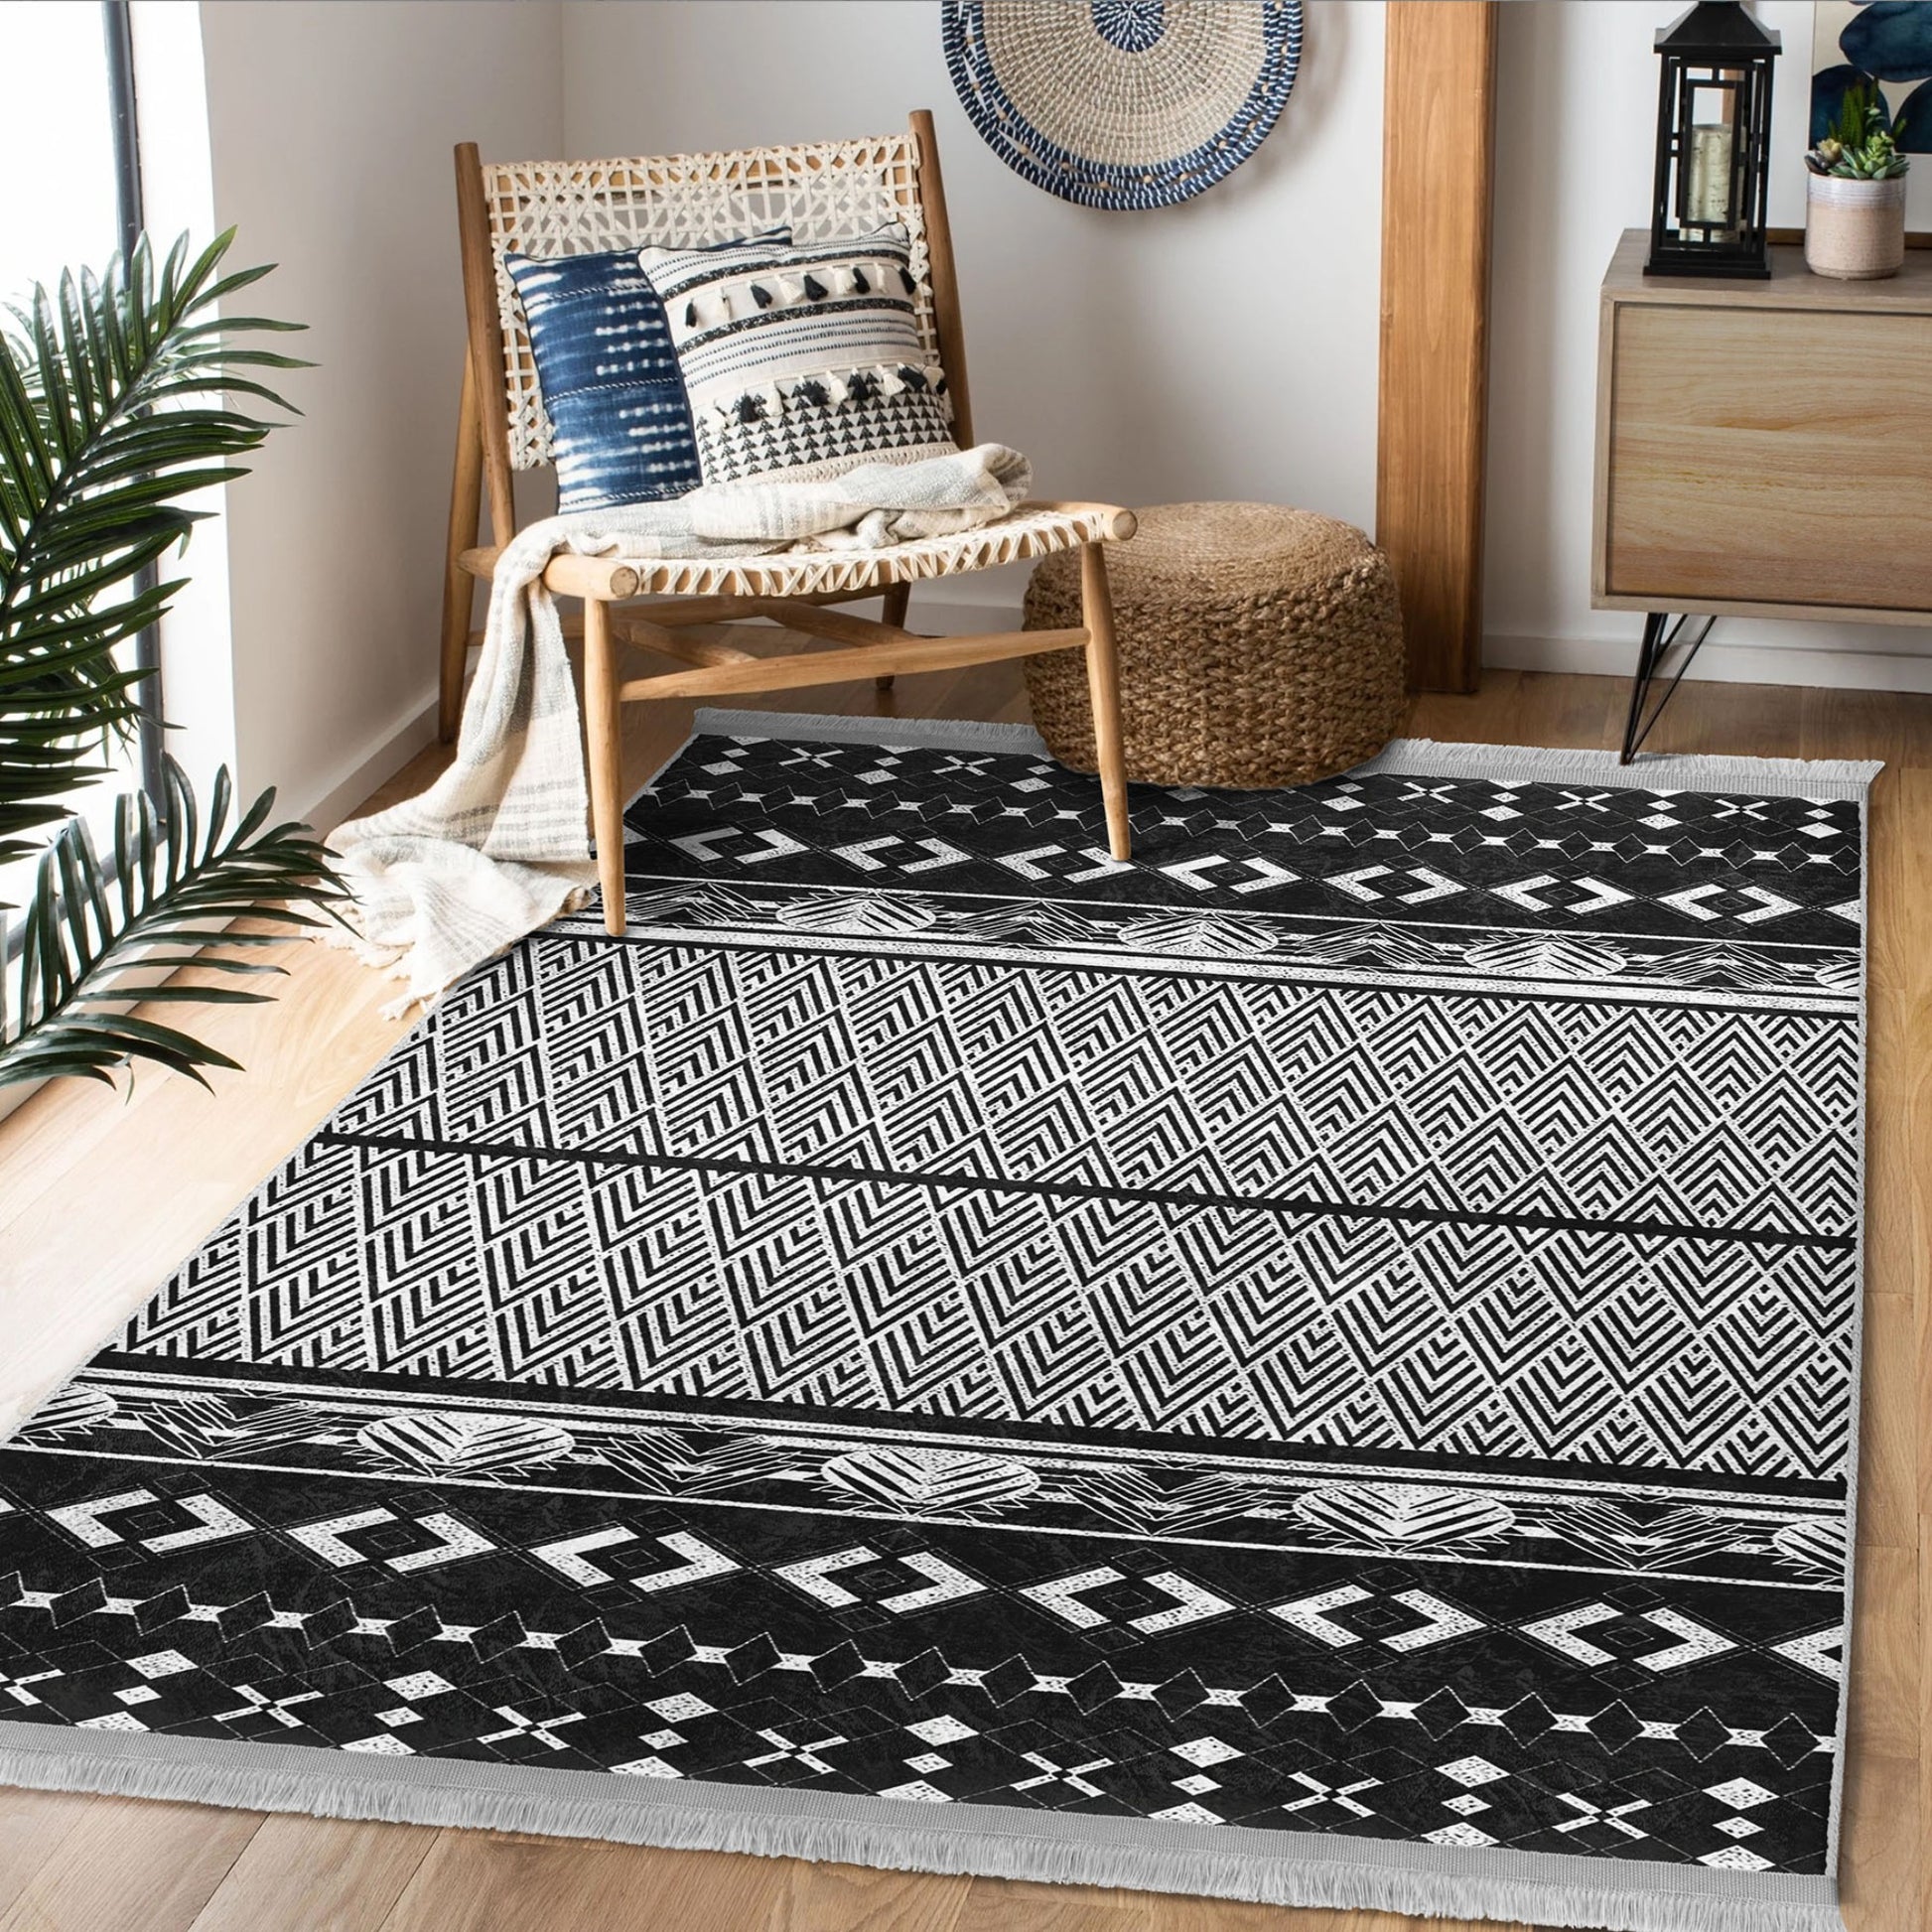 Functional Rug with an Artistic and Chic Craftsmanship